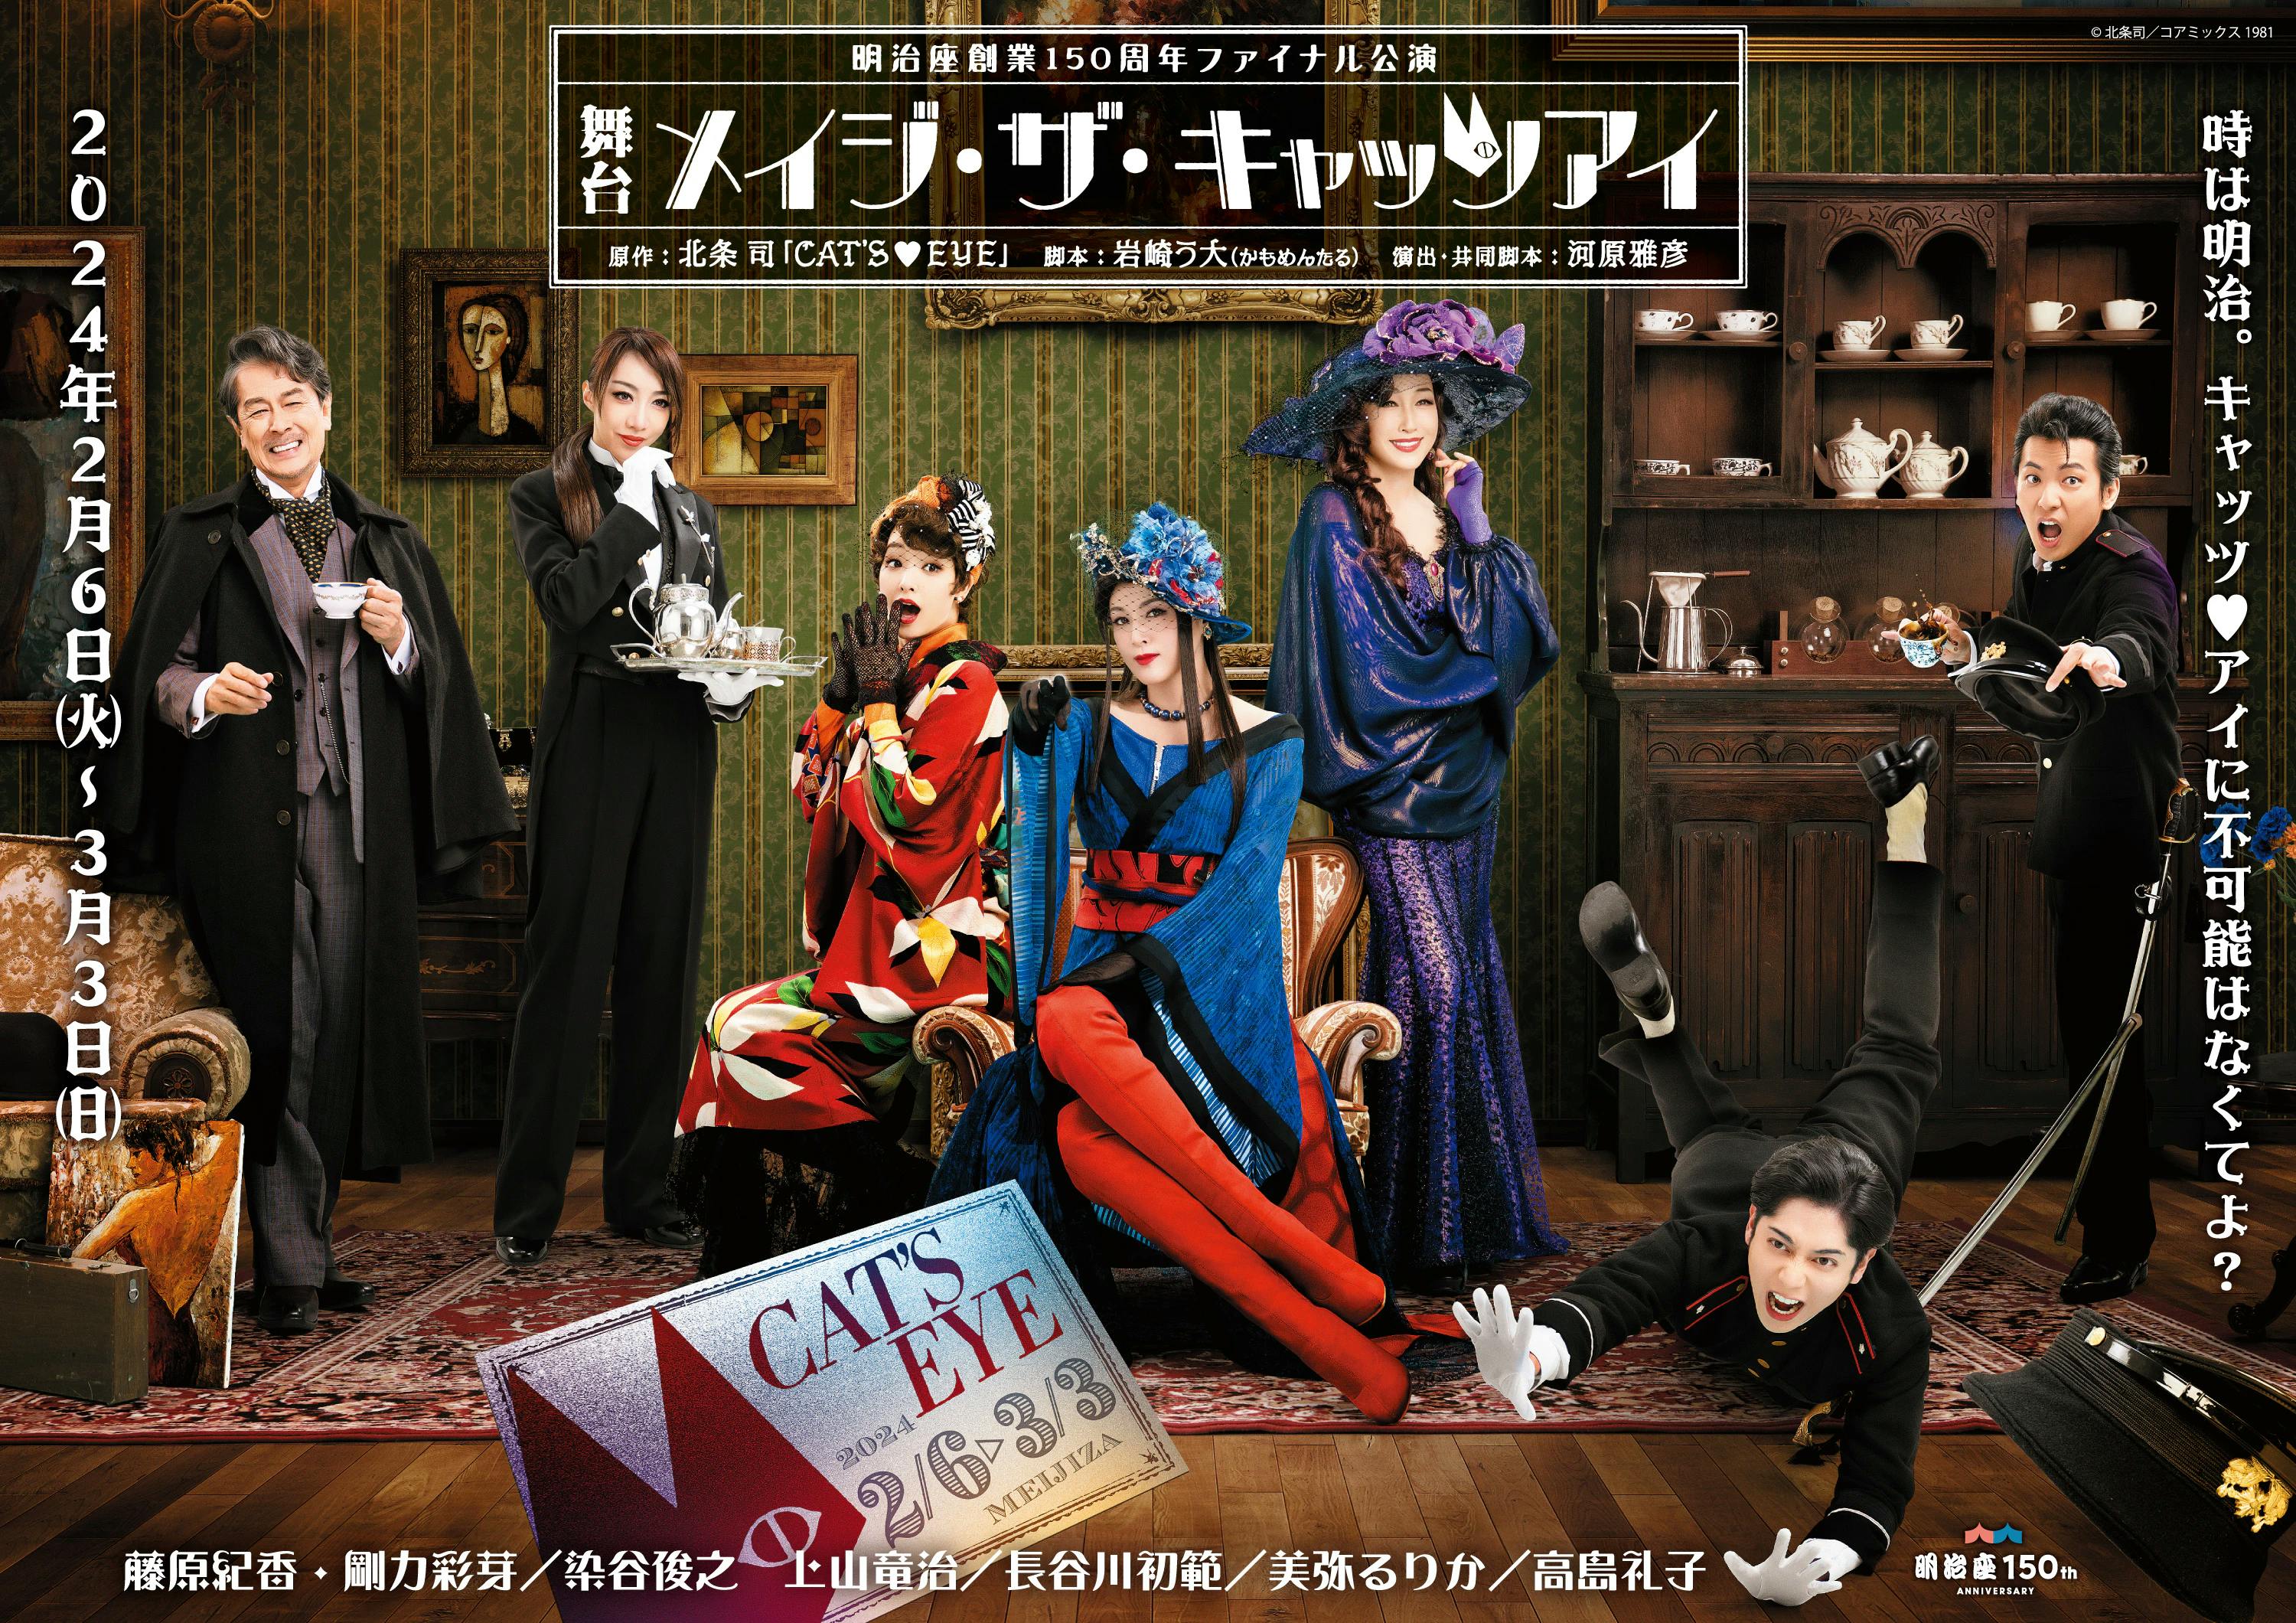 The second visual of the 7 main cast members of the stage play "Mage the Cat's Eye" starring Norika Fujiwara, Ayame Goriki, and Reiko Takashima has been released!